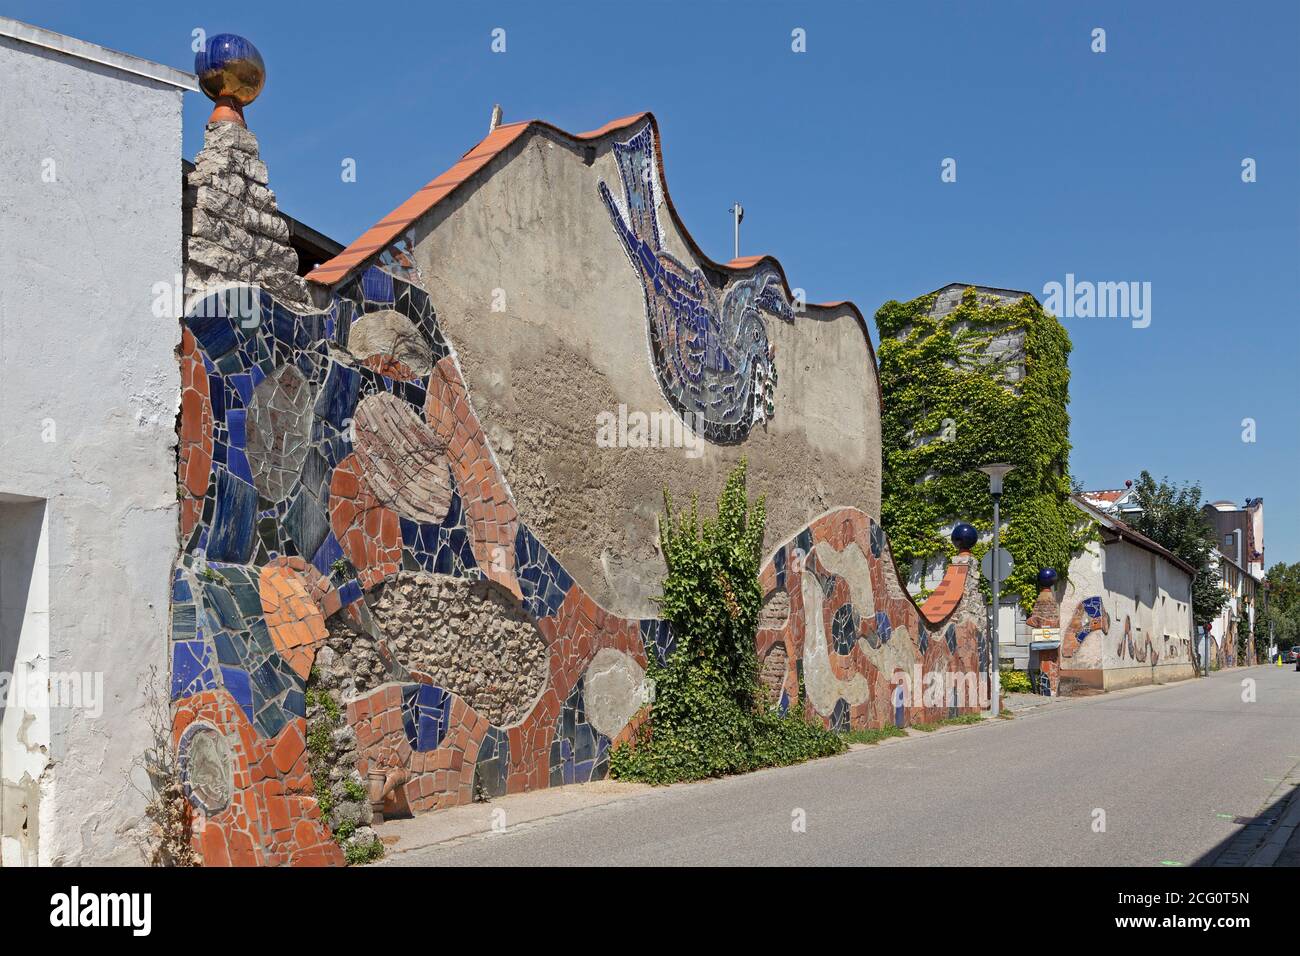 outer wall of Kuchlbauer Brewery, Abensberg, Lower Bavaria, Germany Stock Photo